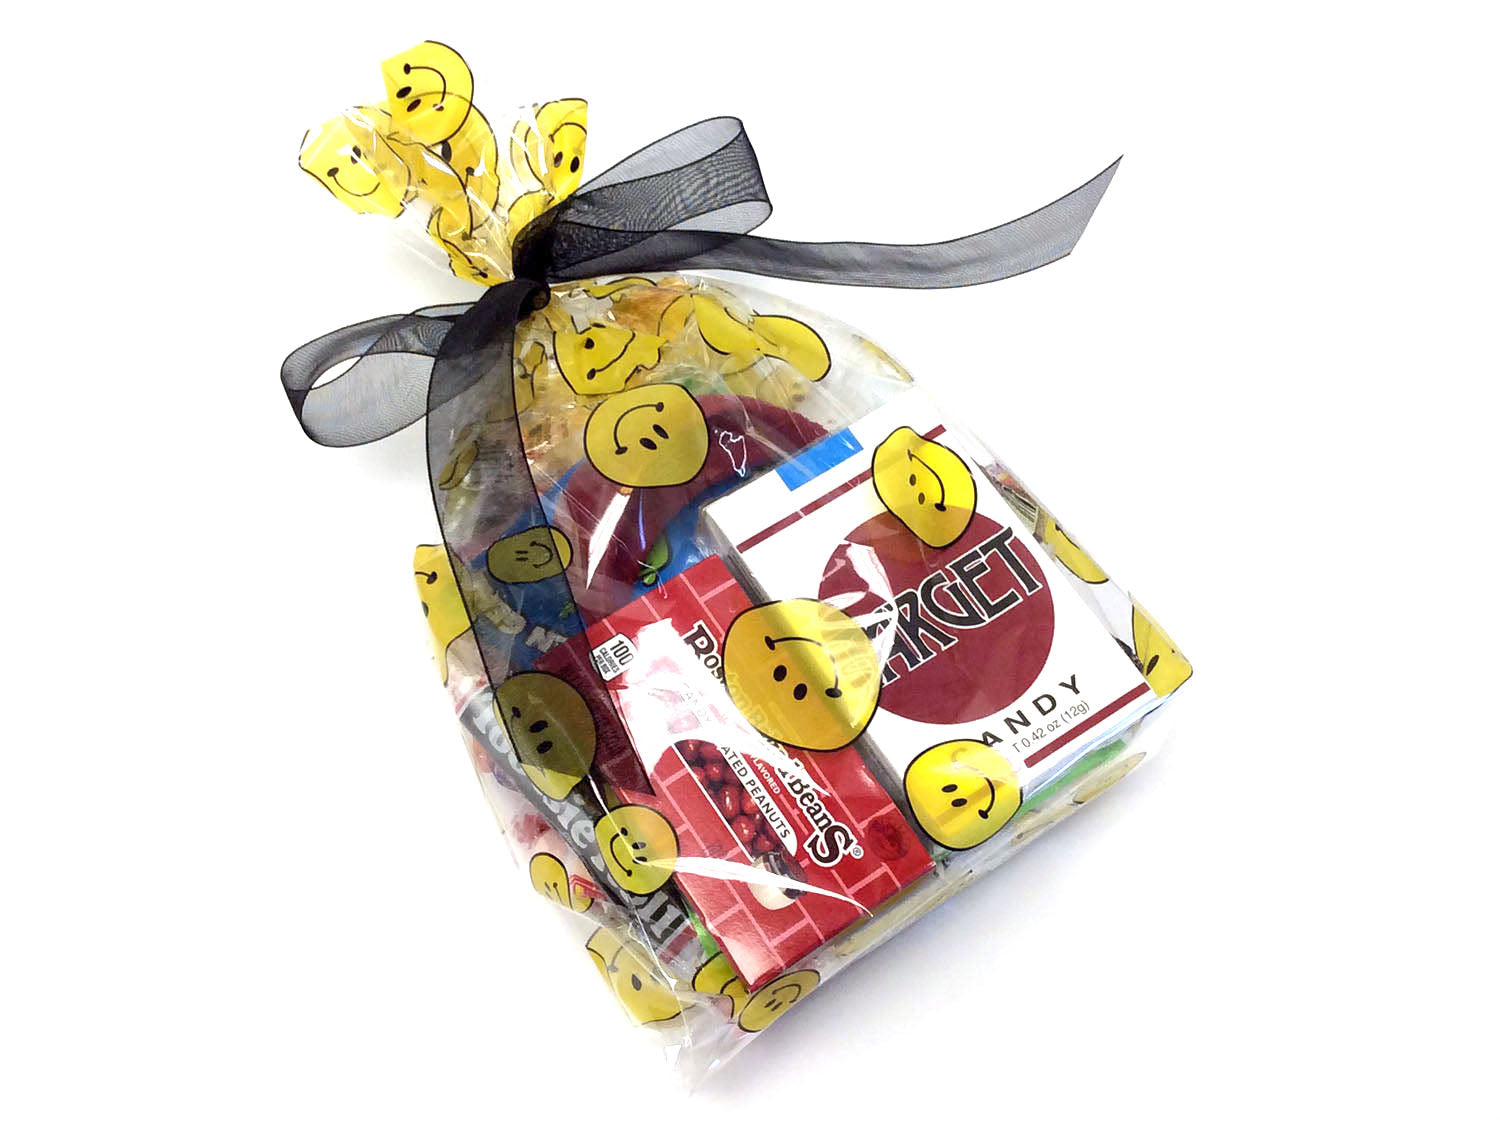 Party Favor Bag with candy - Smiley Faces